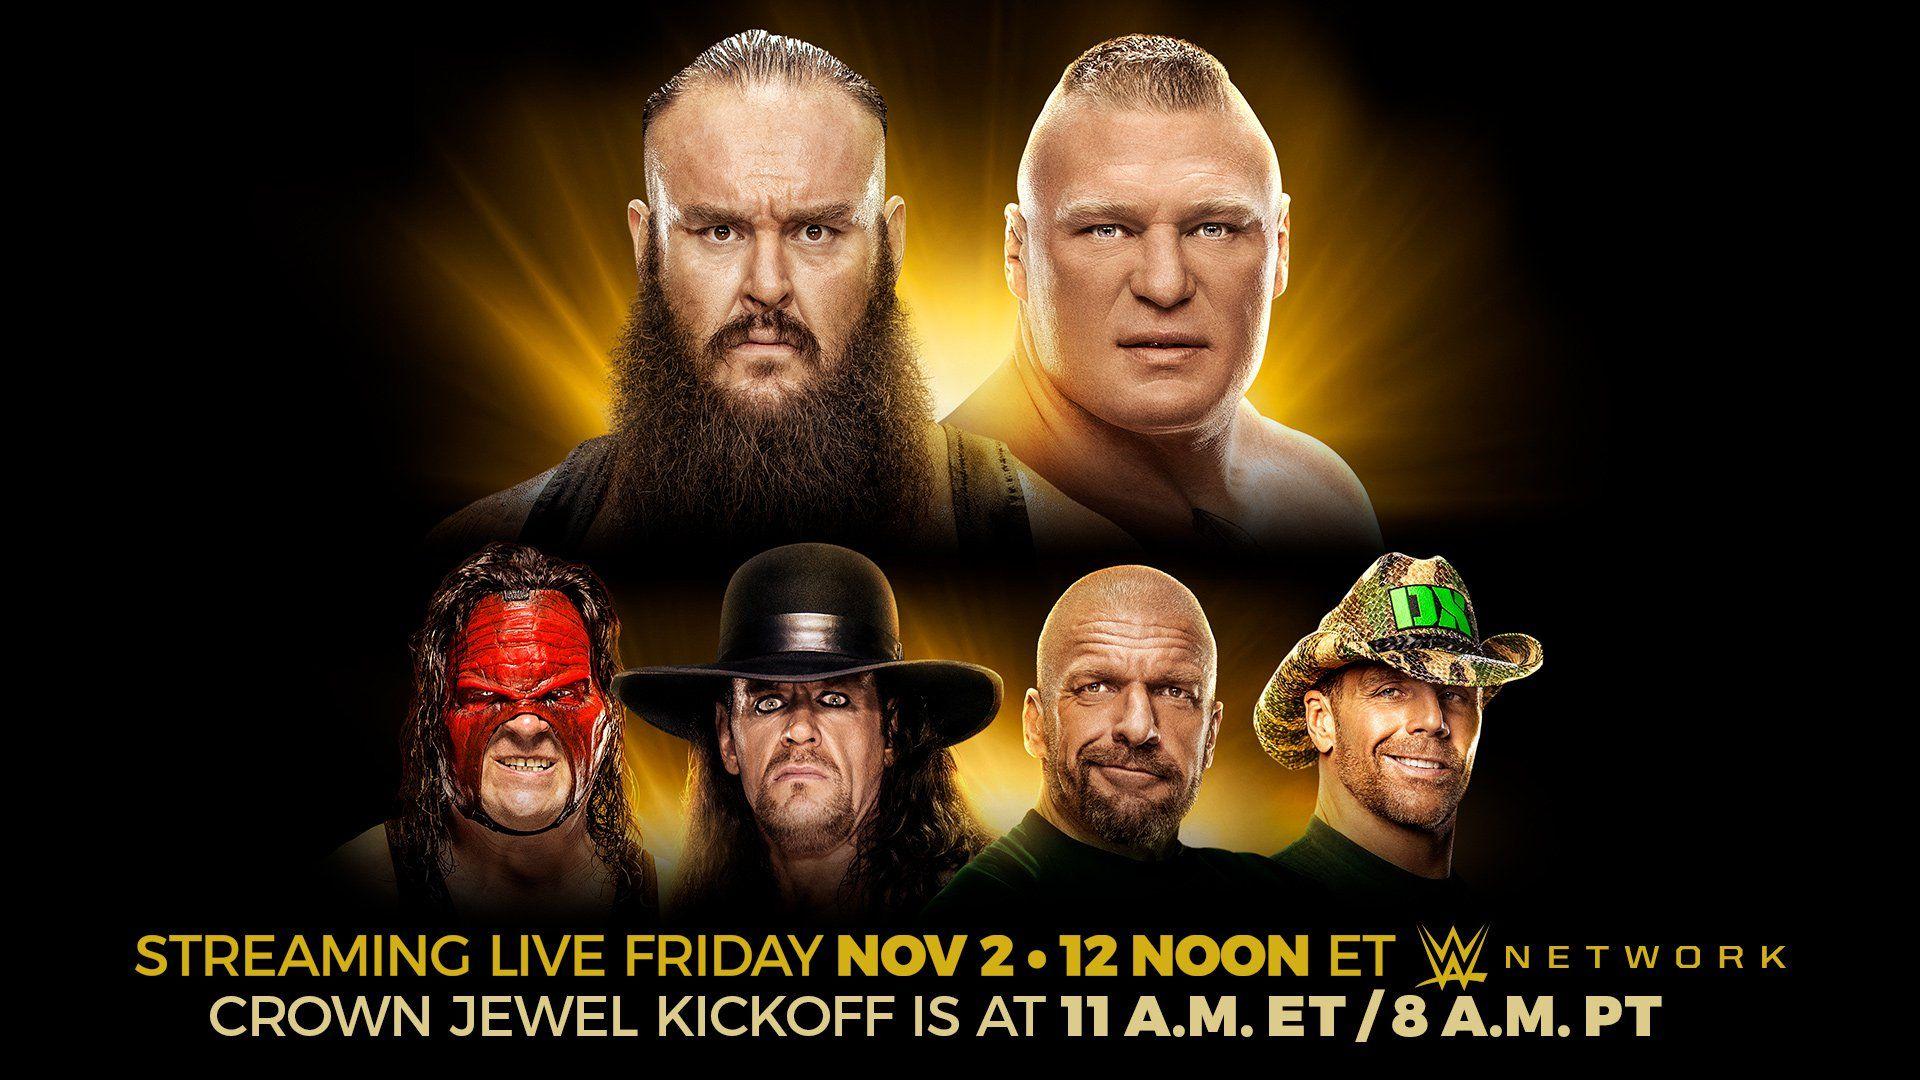 News Crown Jewel match card, previews, start time and more